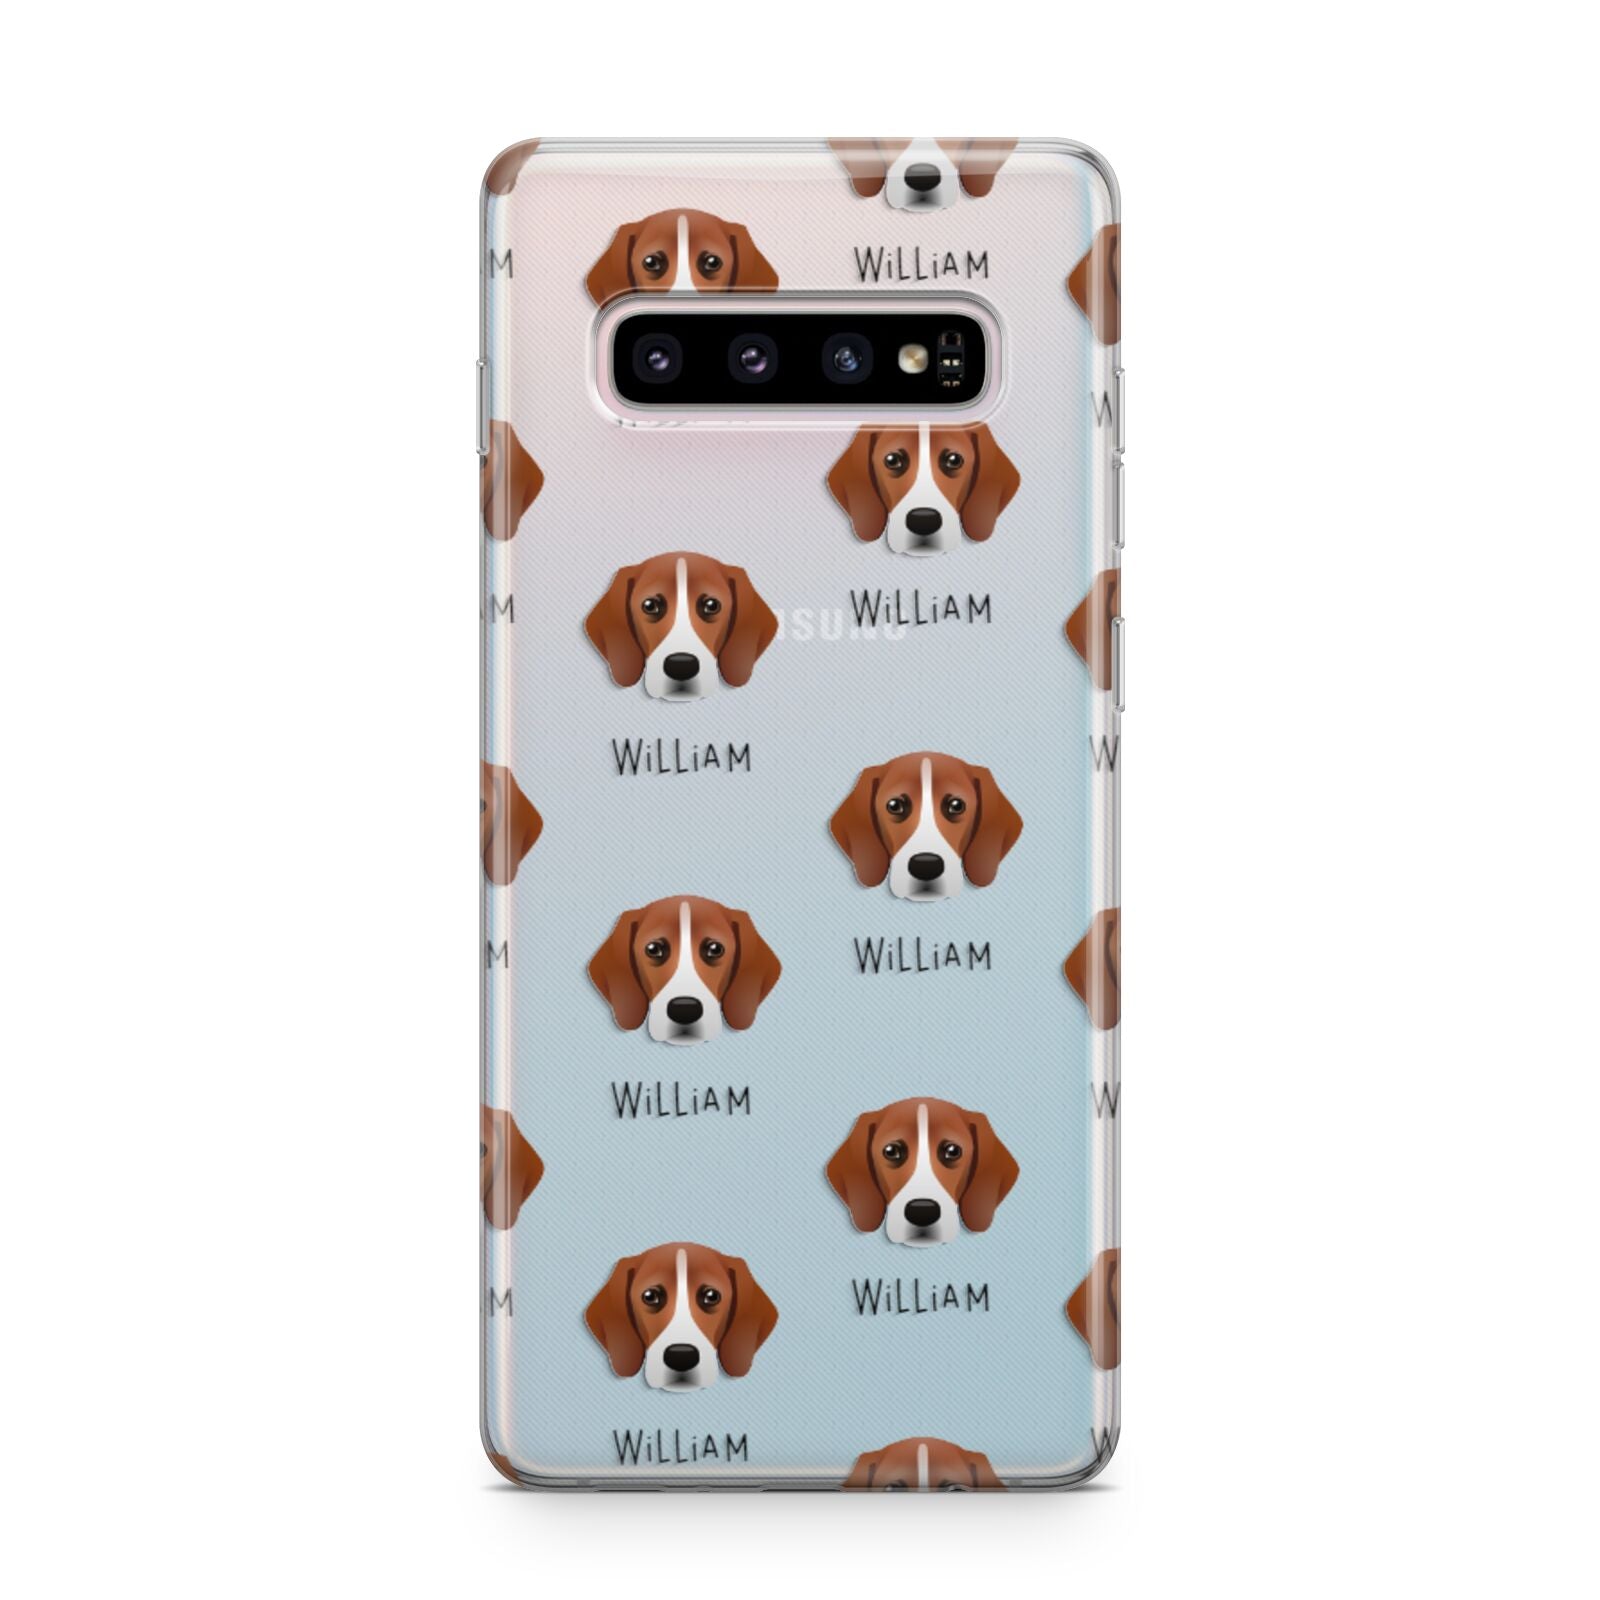 Bassugg Icon with Name Samsung Galaxy S10 Plus Case